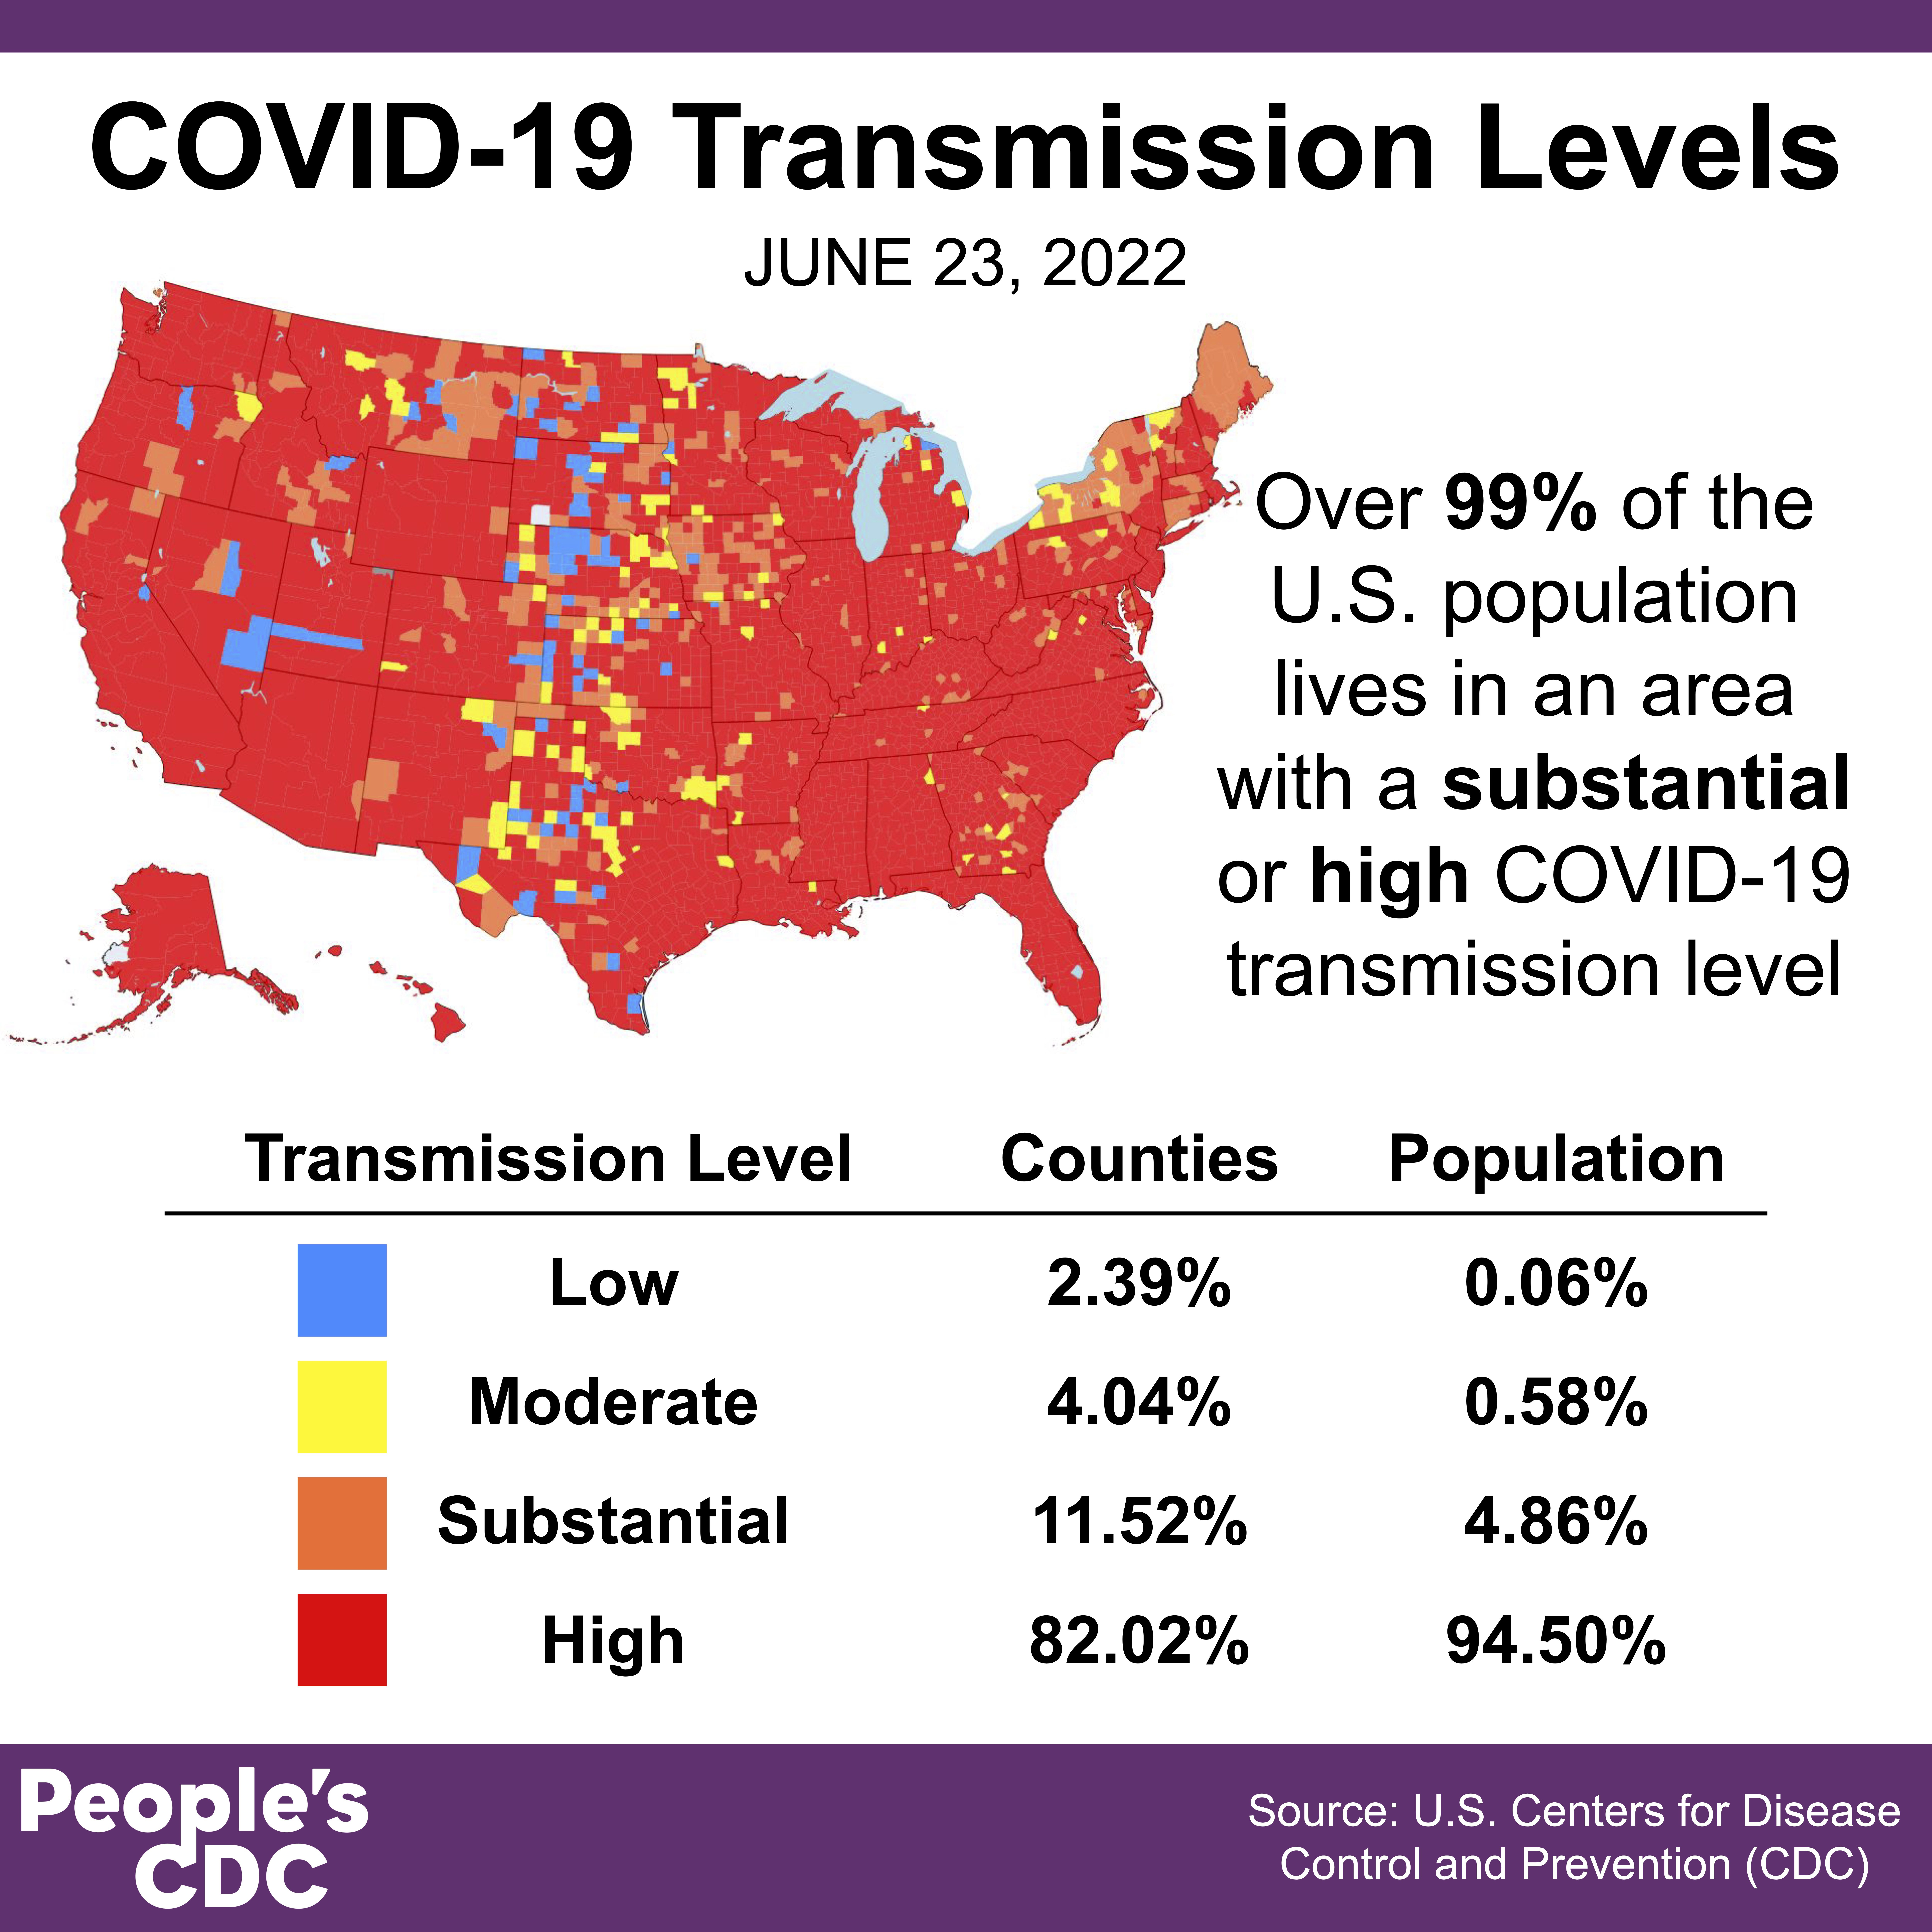 This map and corresponding table show COVID community transmission in the US by county. Most of the US map is red, indicating high levels at 95 percent of the population or 82 percent of counties. An additional 5 percent of the population or 12 percent of counties are in areas with substantial transmission, in orange. Thus, over 99 percent of the US population lives in an area with high or substantial COVID transmission. Only the middle vertical line of the contiguous US--the Dakotas, Nebraska, Kansas, Oklahoma, and northern Texas--show a higher concentration of moderate and low transmission, in yellow and blue, respectively. The graphic is visualized by the People’s CDC and the data are from the CDC.